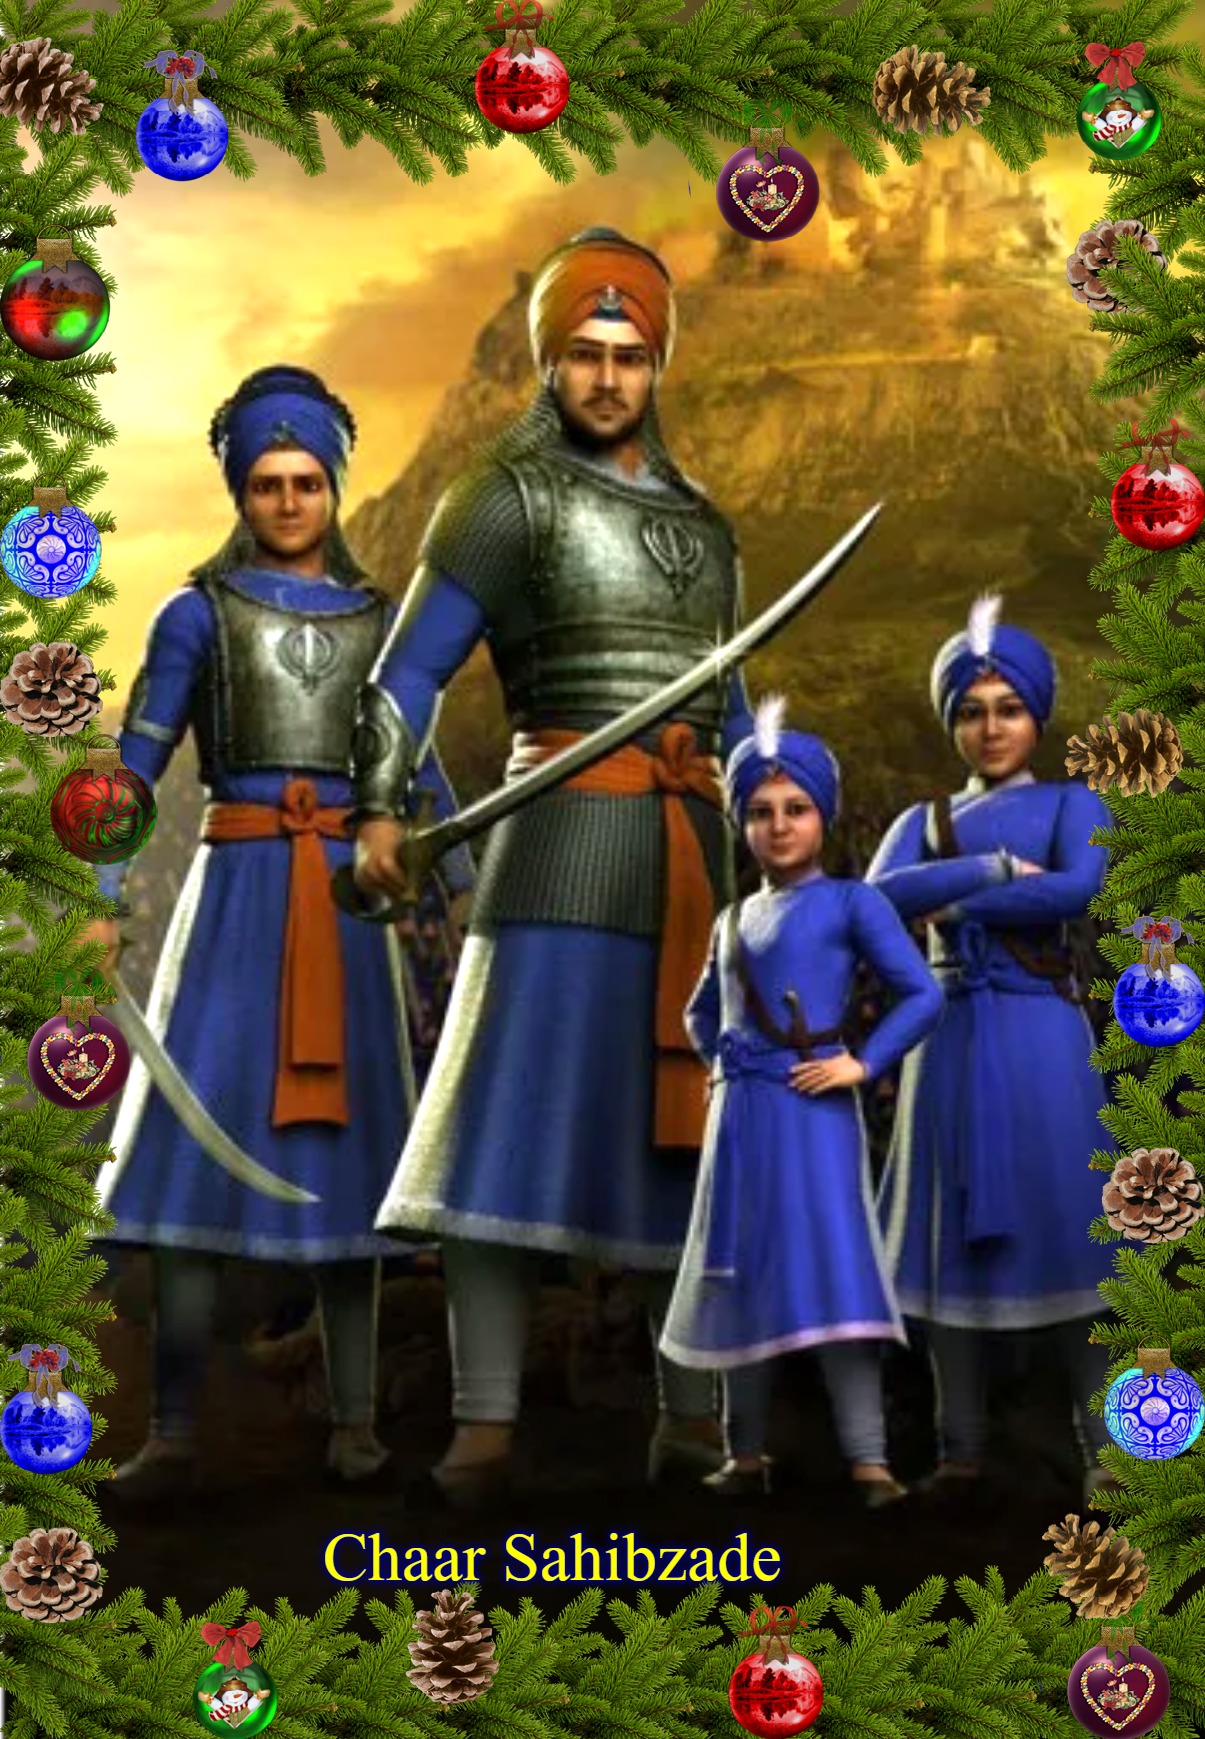 Read more about the article “Martyrdom of Four Brave Sons of Guru Gobind Singh Ji”